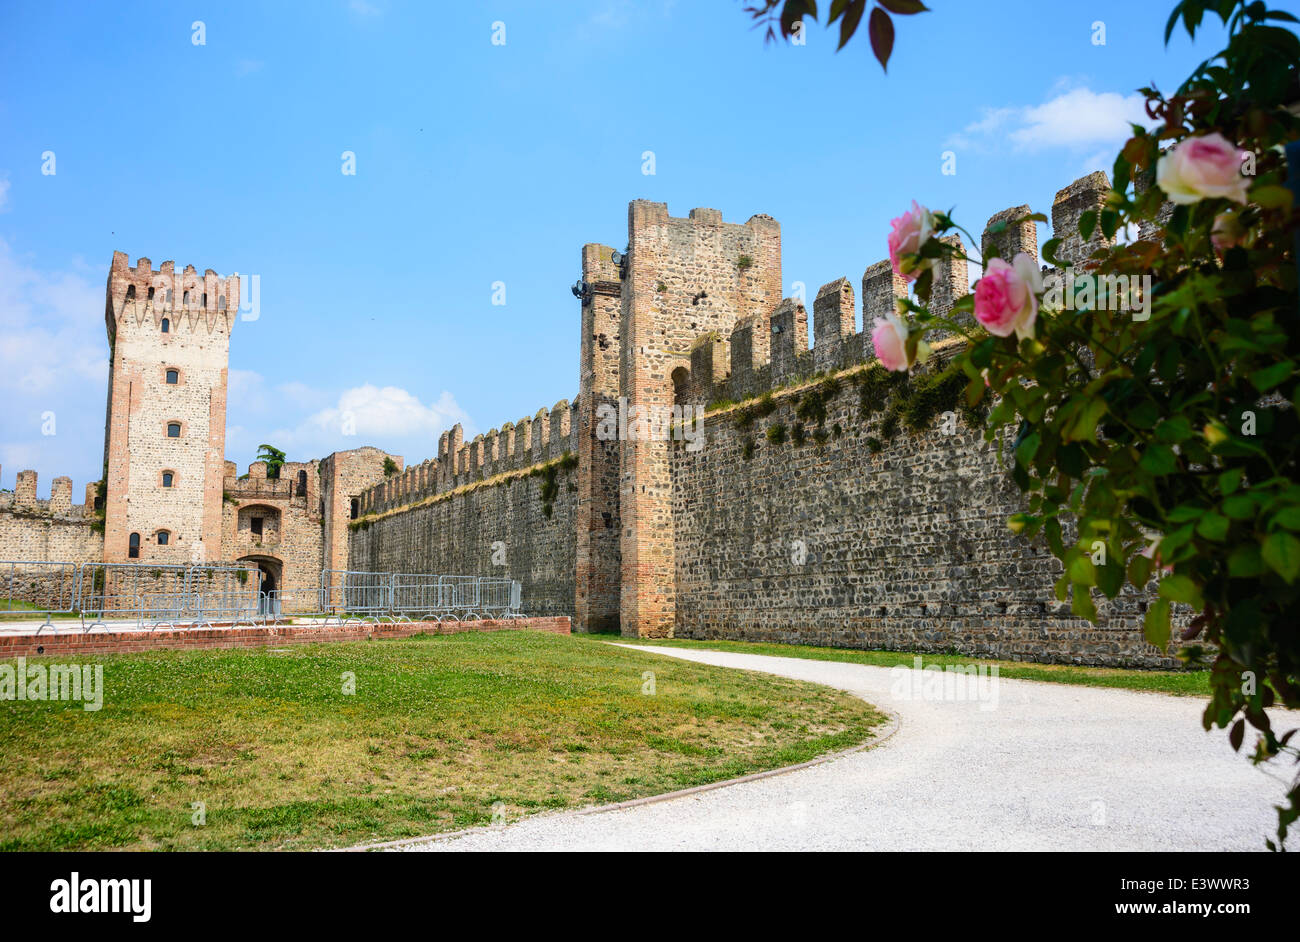 Castle in Este a walled medieval town in the Veneto region of northern Italy Stock Photo